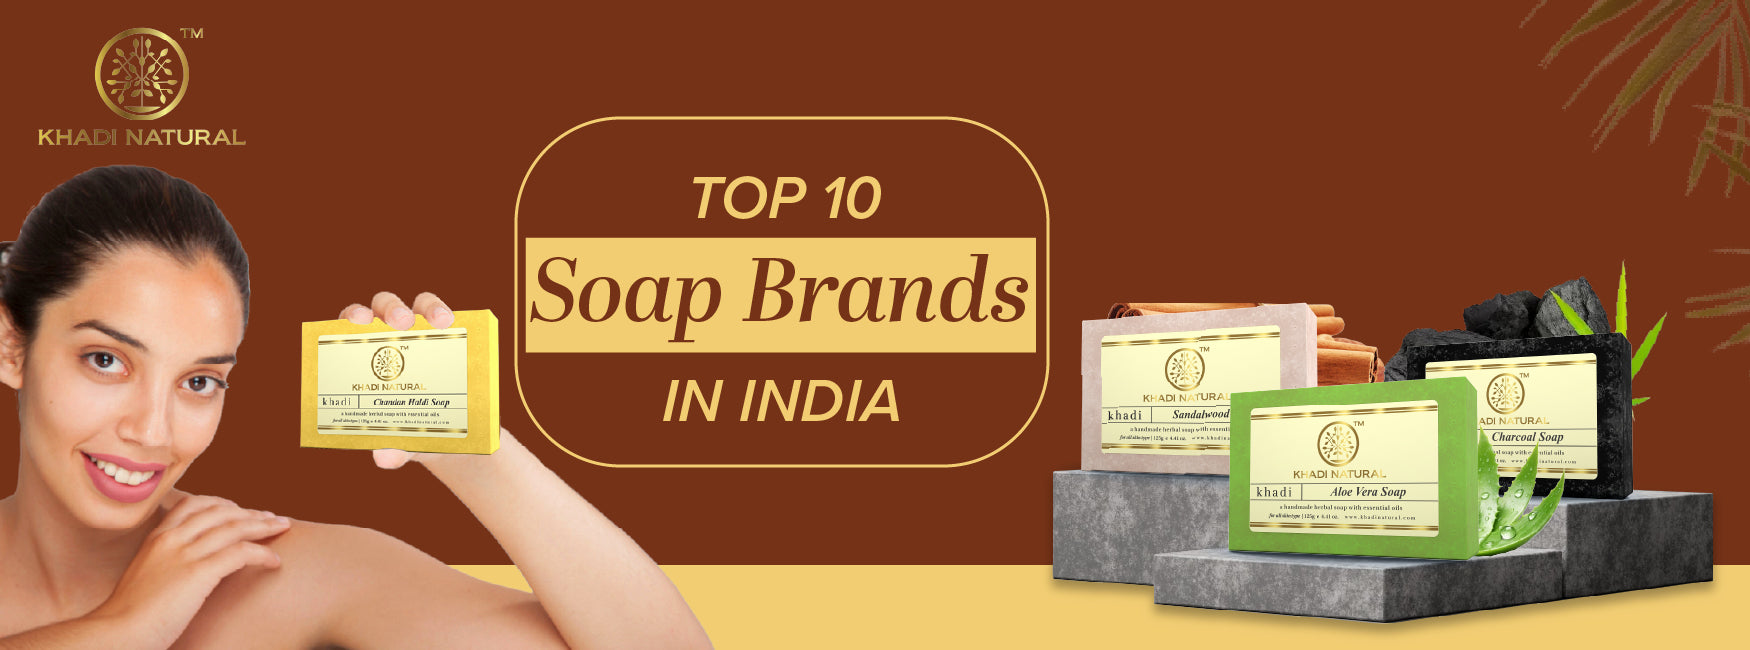 Top 10 Soap brands in India